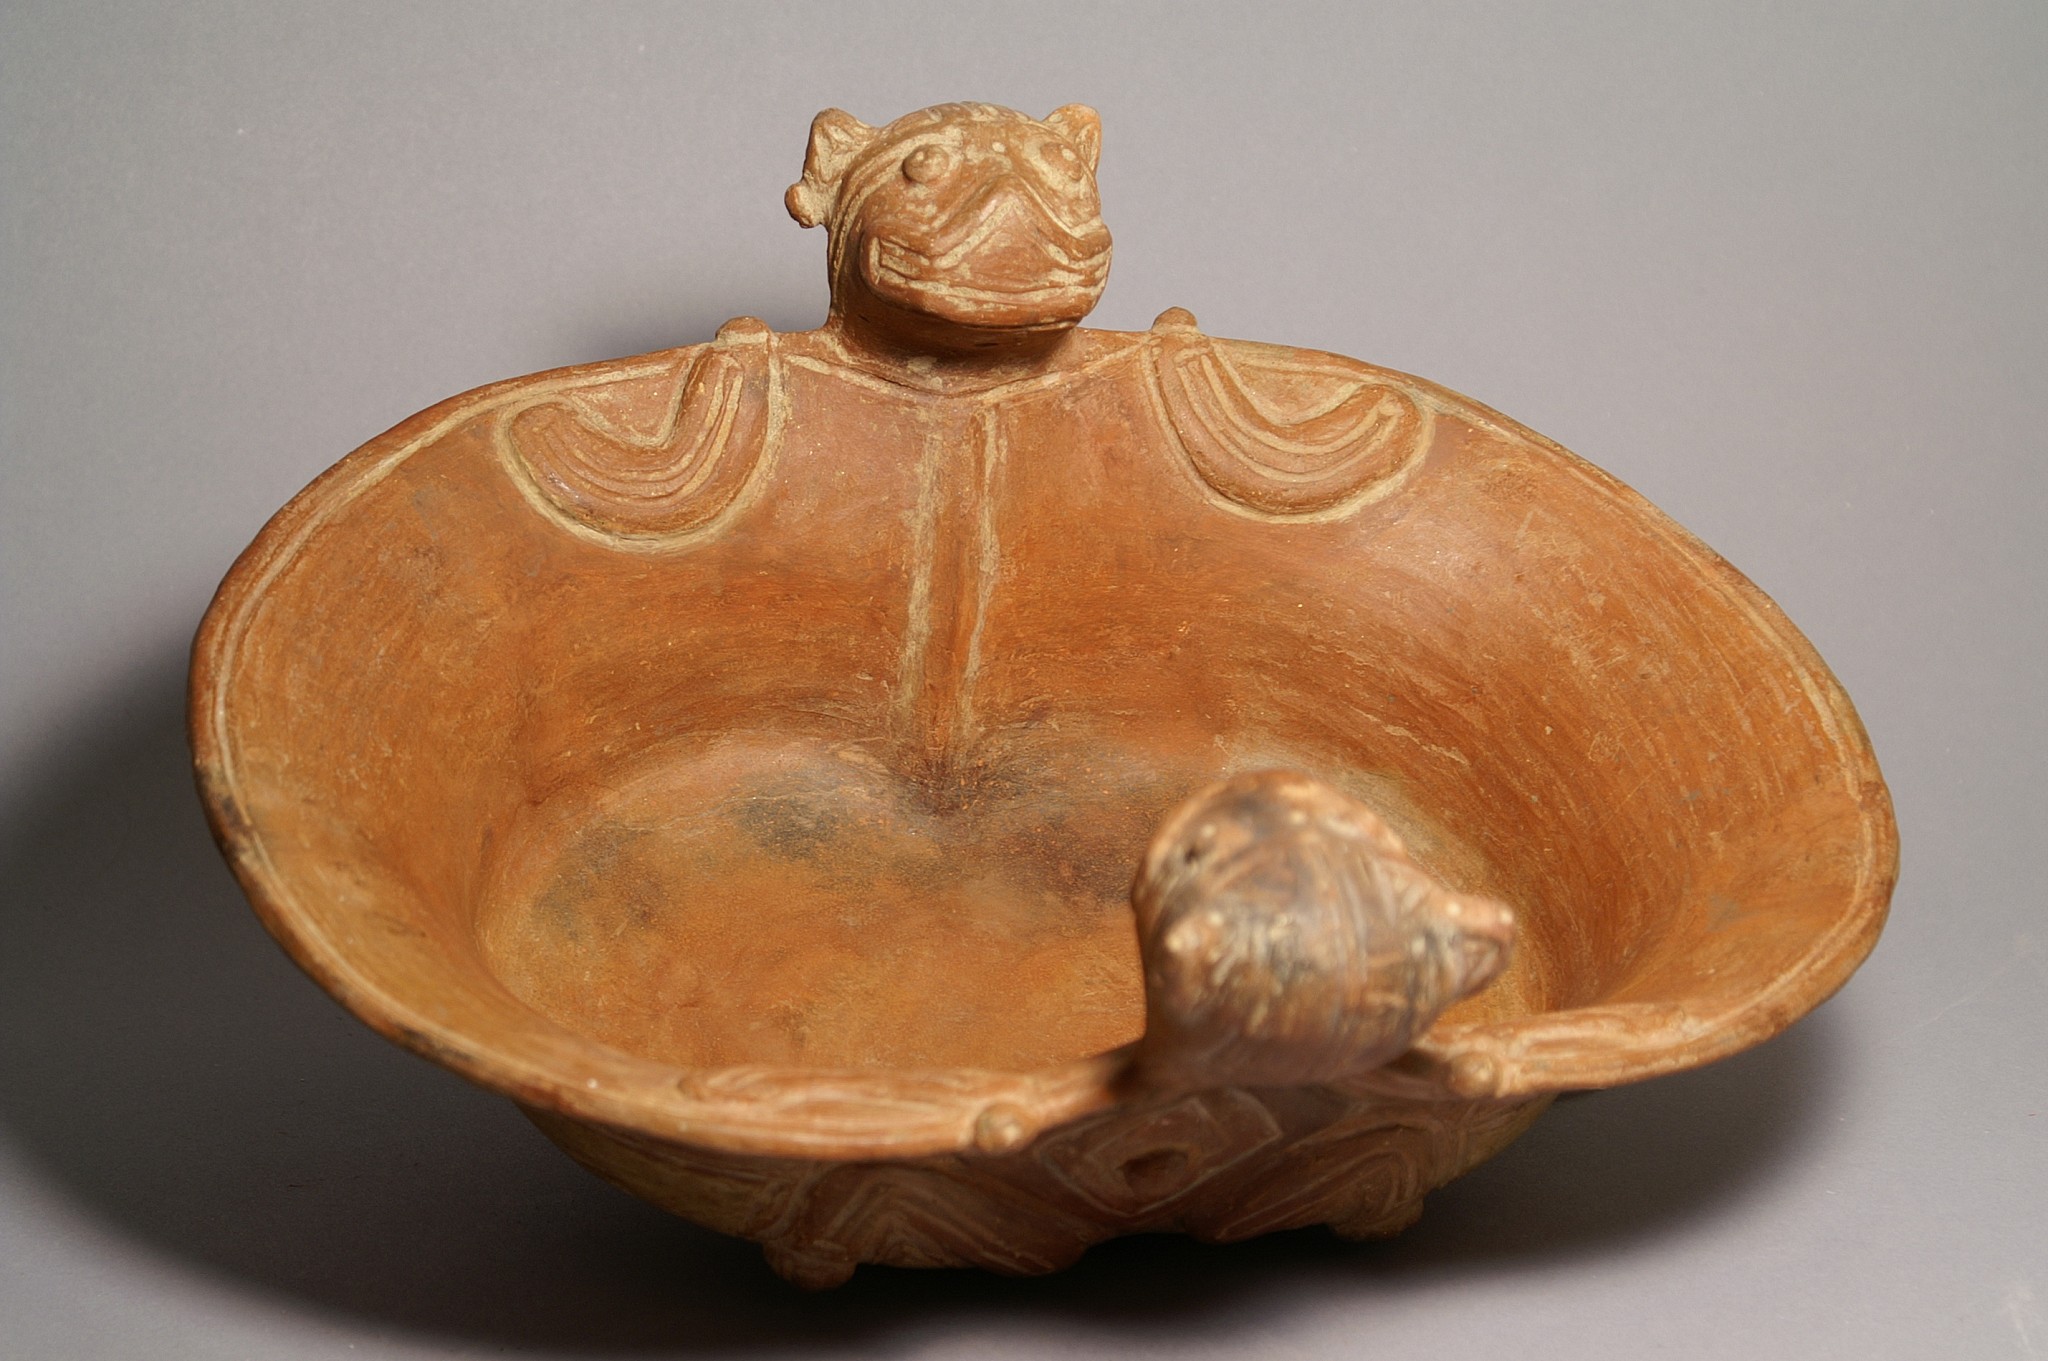 Colombia, Tairona Ceramic Tray with Bat Adornos
A redware ceramic tray embellished with two smiling bats with outstretched wings.  The head and the body of the bat are decorated with incised lines, the back with a diamond-shaped motif. The outer wall of the bowl is incised with squarish scroll designs.
Media: Ceramic
Dimensions: L:  13", W:  10-1/2"
$8,000
94271